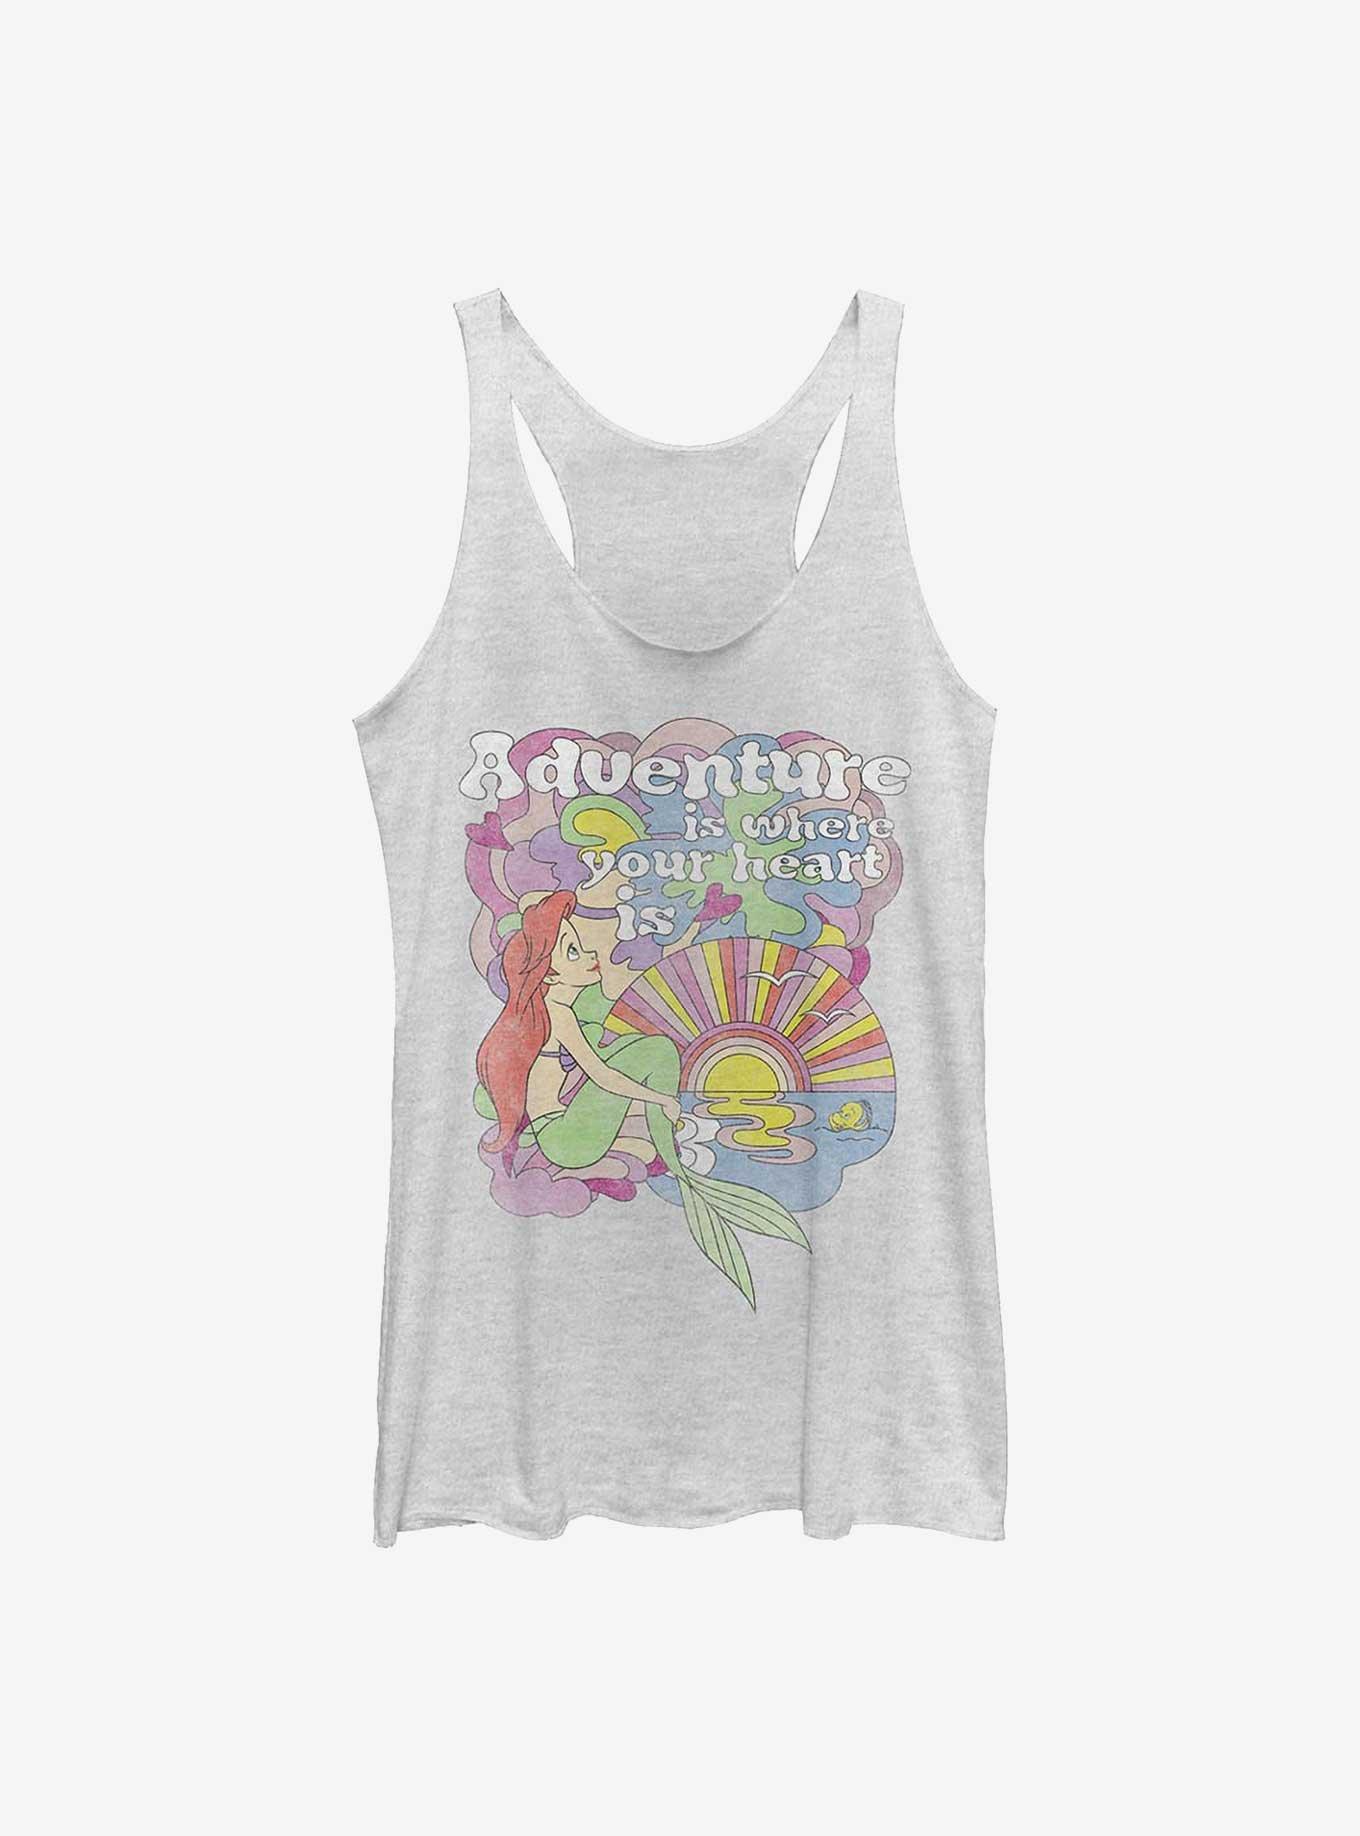 Disney The Little Mermaid Adventure Is Where Your Heart Is Girls Tank, WHITE, hi-res